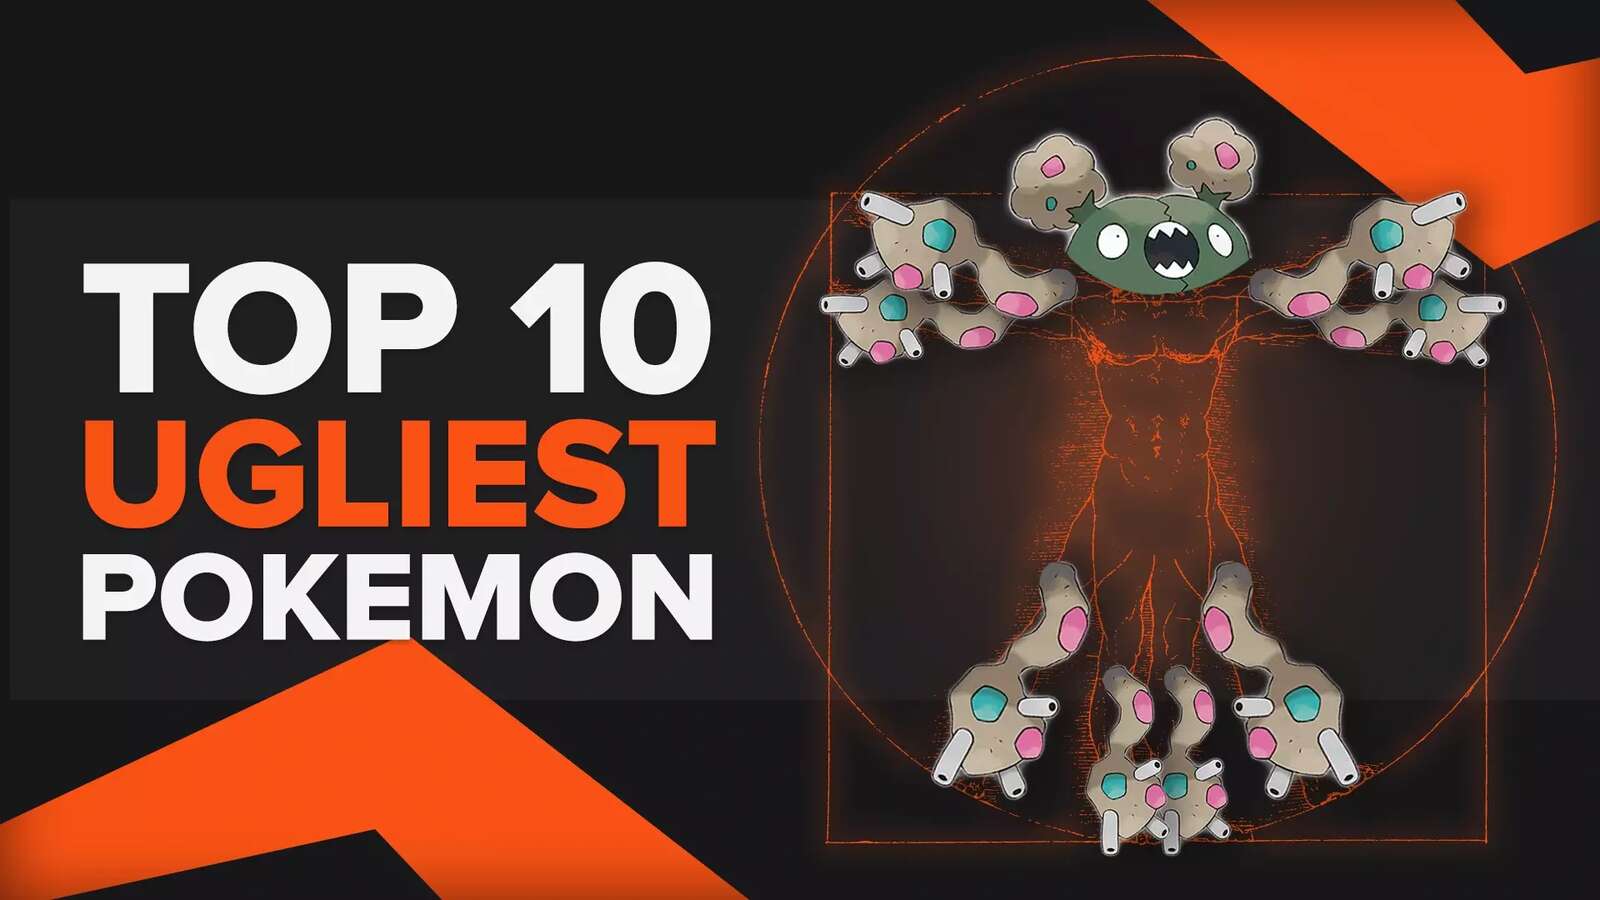 The 10 Ugliest Pokemon in the Franchise [Ranked]